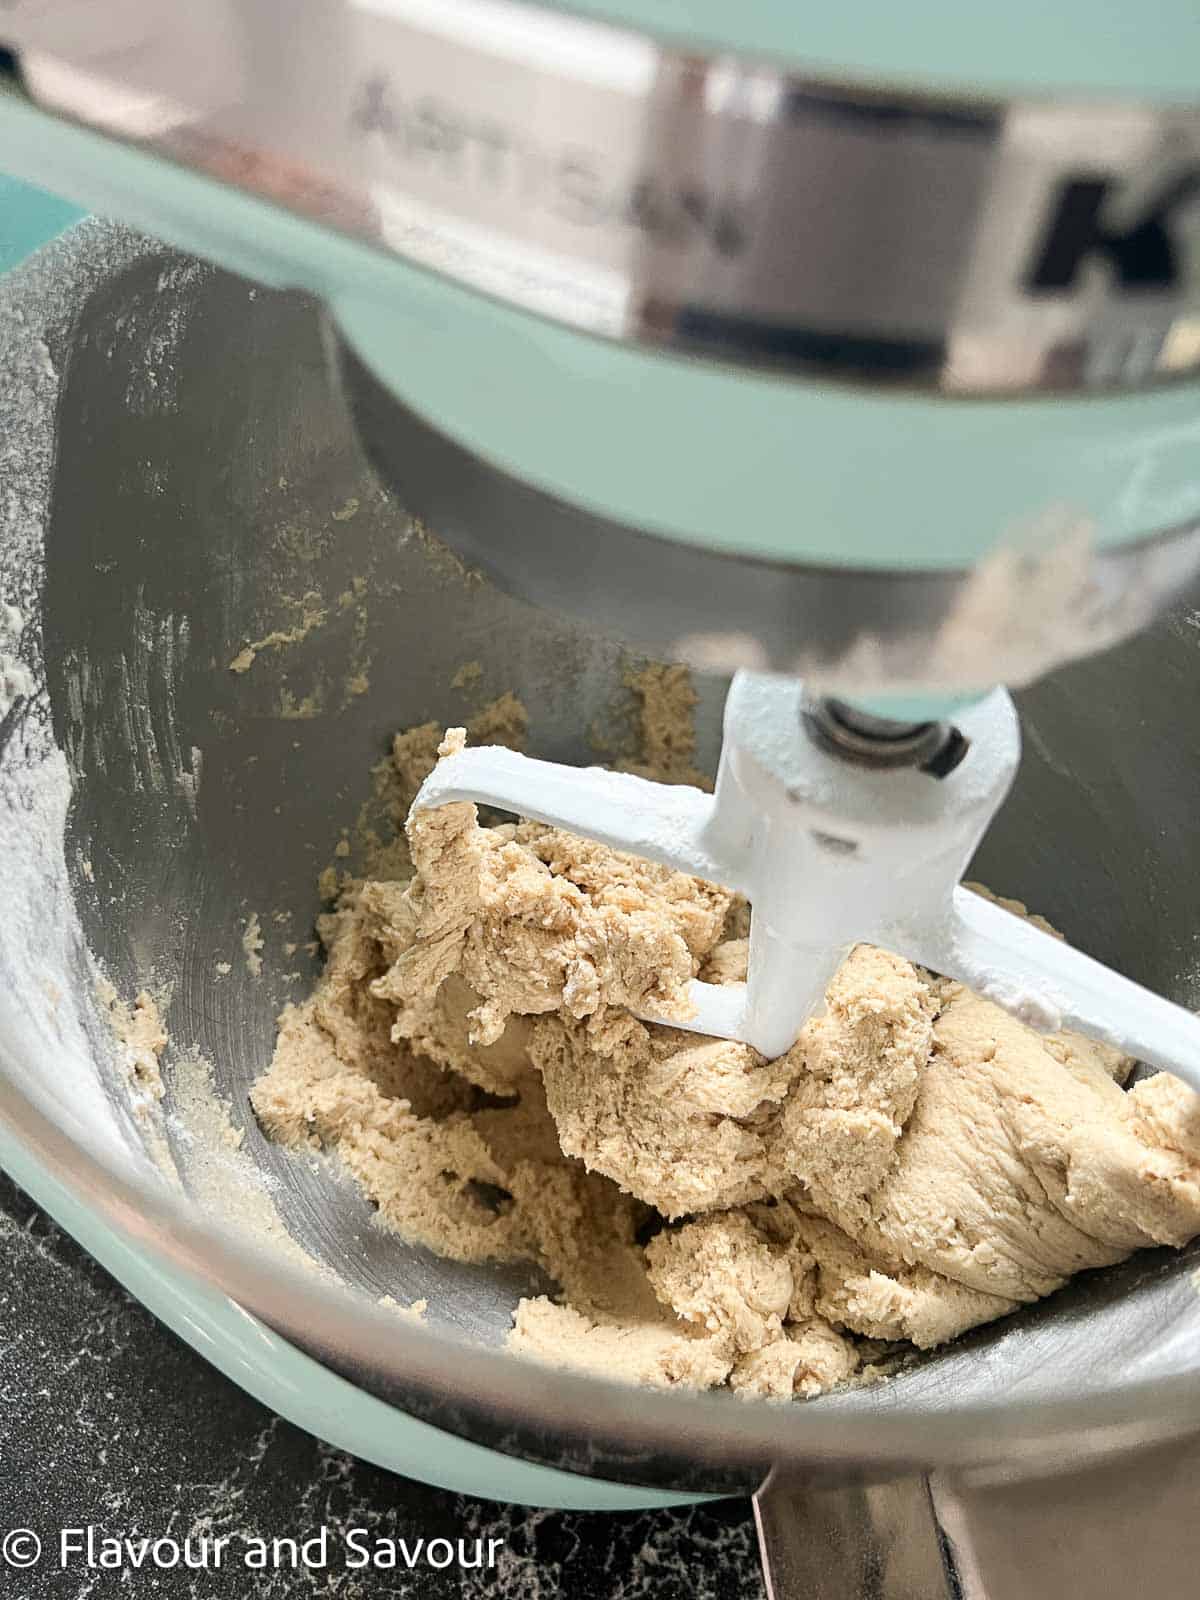 Dry ingredients added to toffee chocolate chip cookie batter in the bowl of a stand mixer.